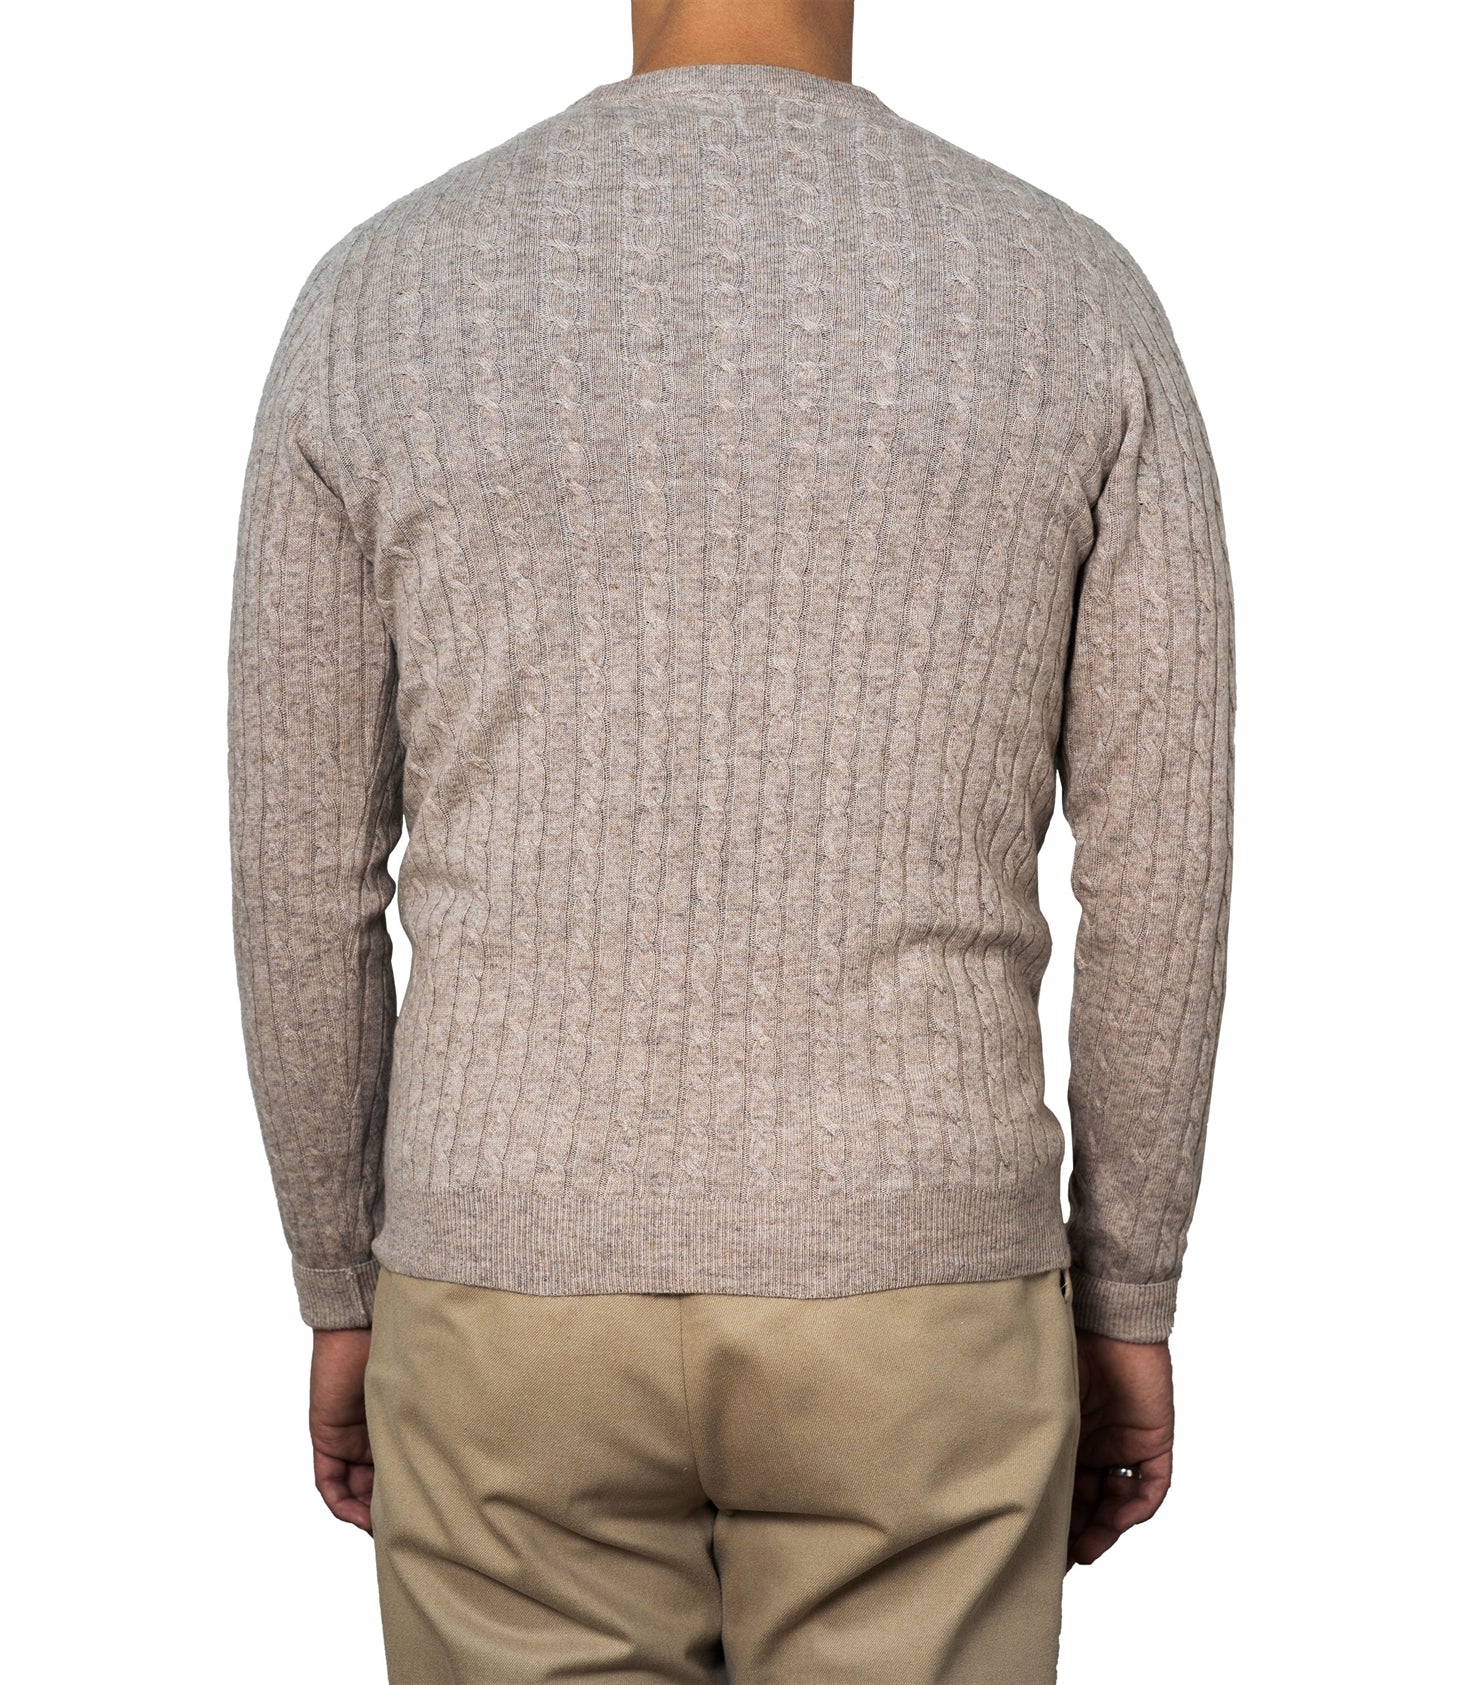 Enar Beige Cable Knit Sweater